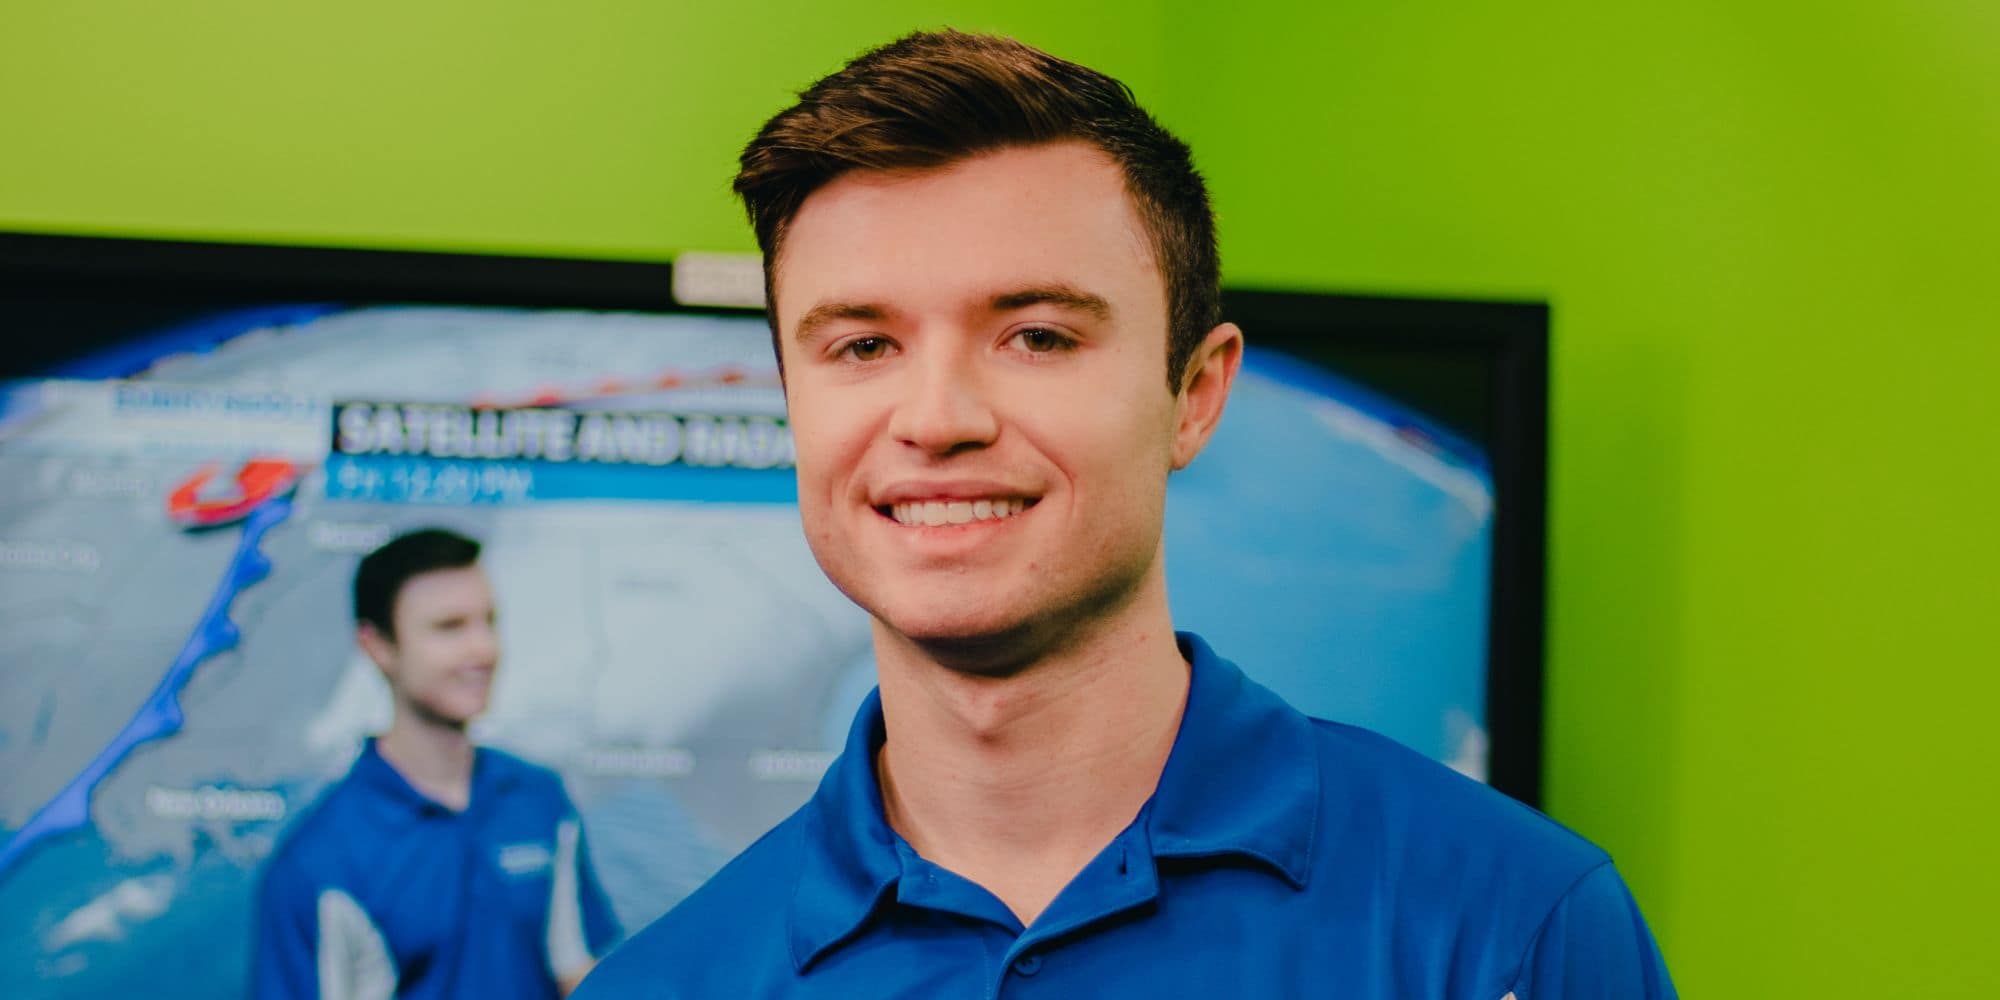 Senior Ryan Marando was named the Meteorology Student of the Year for the Embry-Riddle Aeronautical University Daytona Beach Campus in March 2022. He was spotlighted in celebration of World Meteorological Day. (Embry-Riddle/Josh Asiaten)